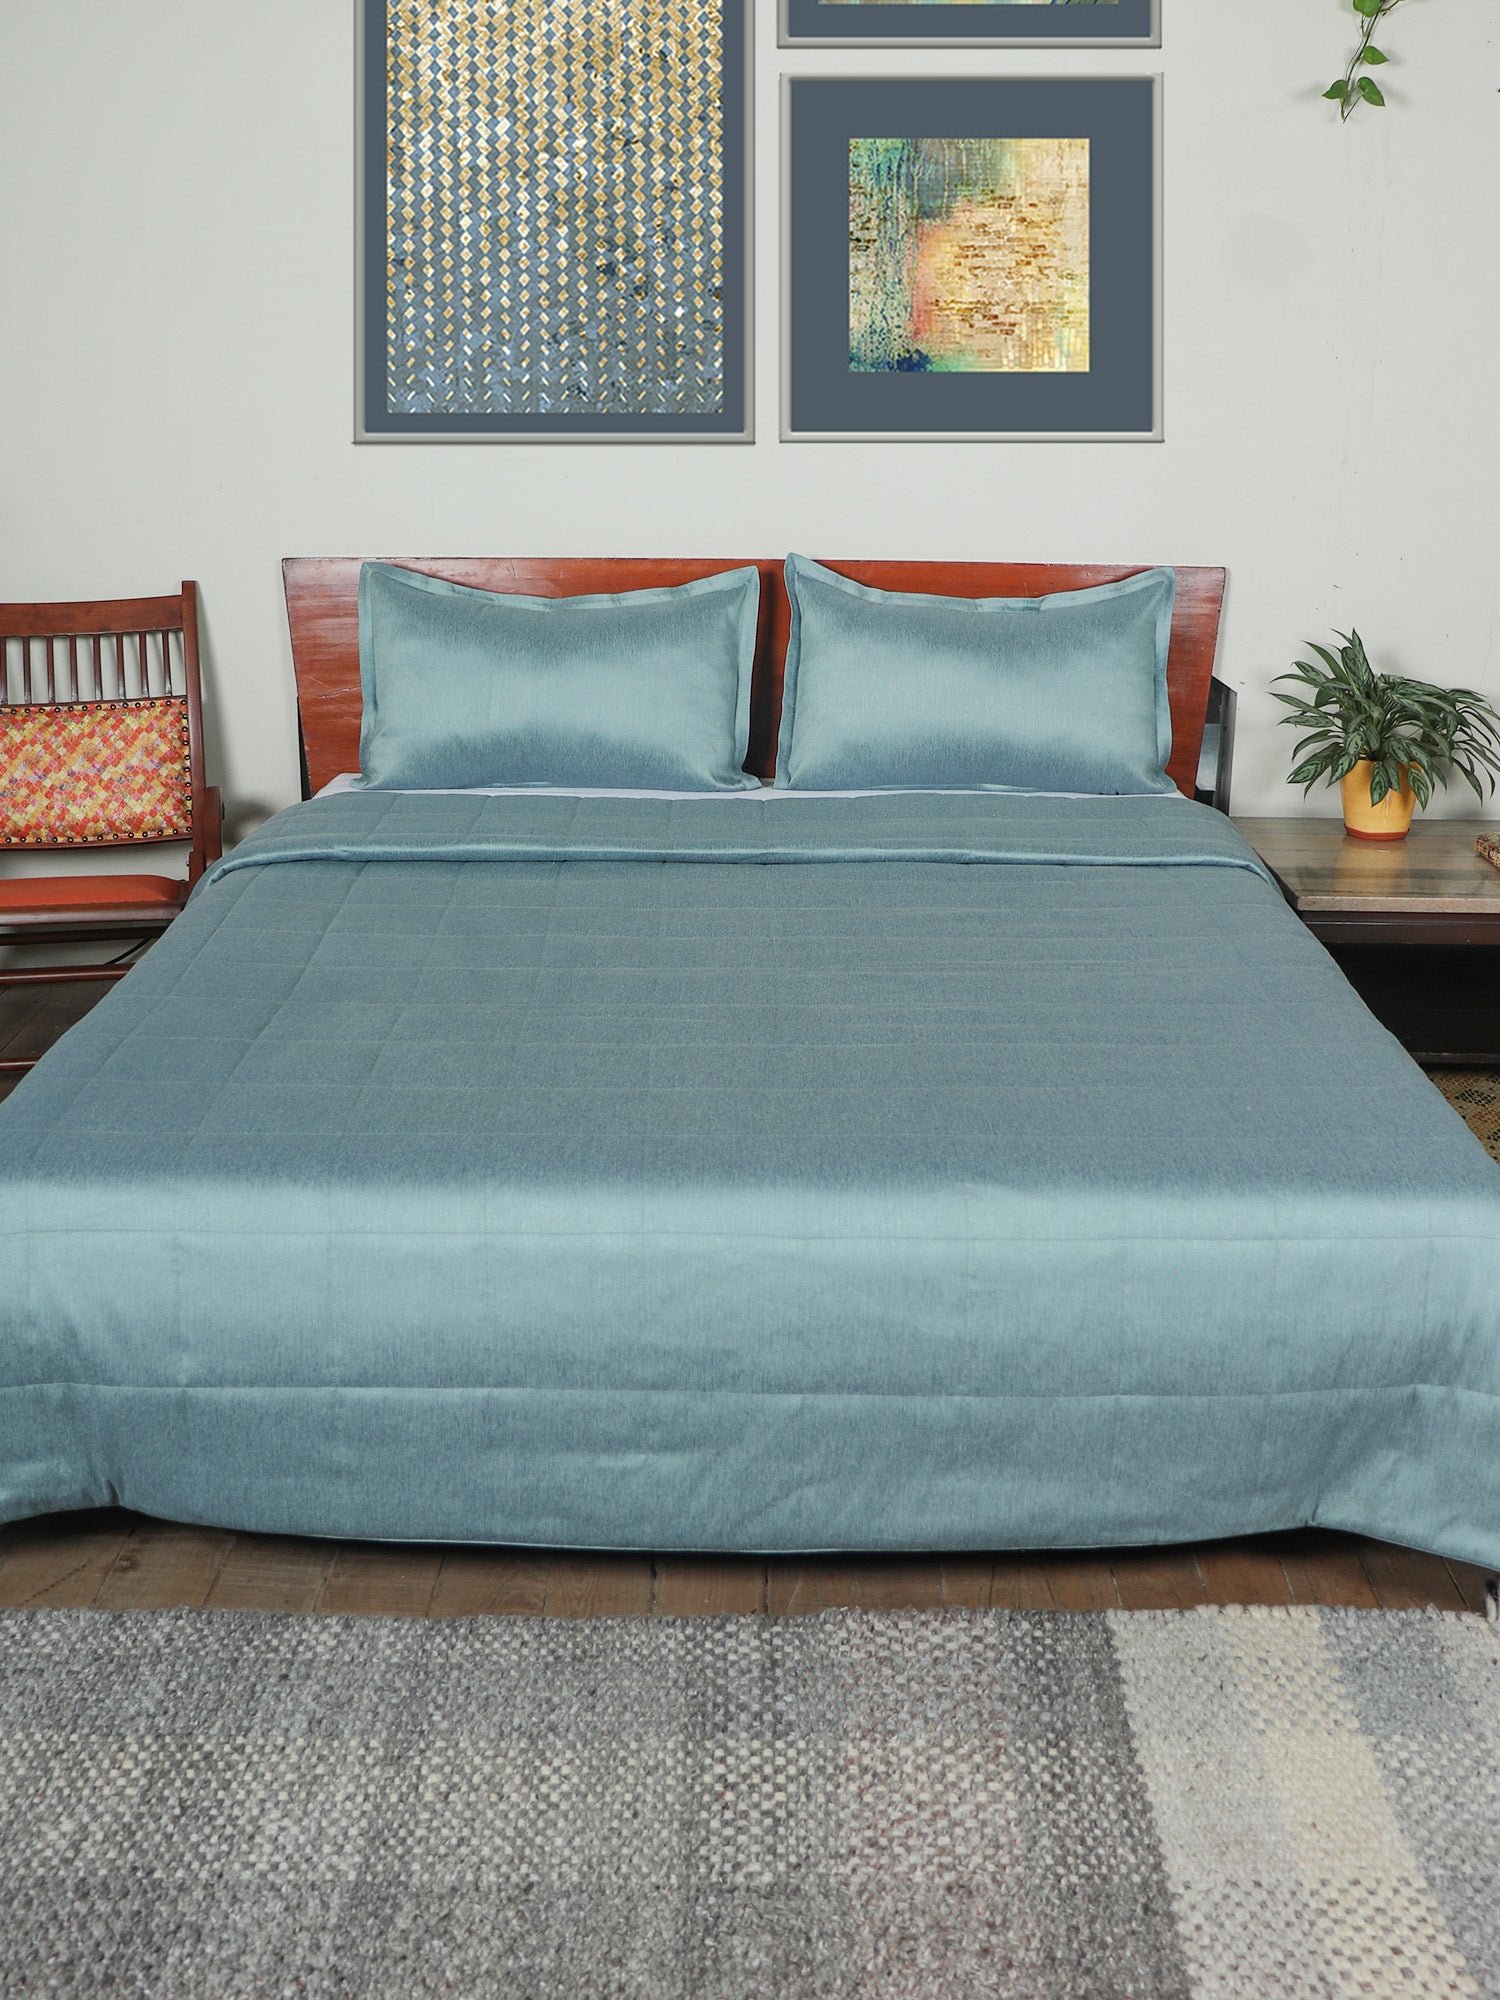 Quilt for Double Bed King Size | Self Square Quilted | AC Comfortor/Blanket/Duvet | Polyester with 100% Cotton 300TC Backing Fabric - Teal BLue | 90x108+17x27 inches (228x274 cms)